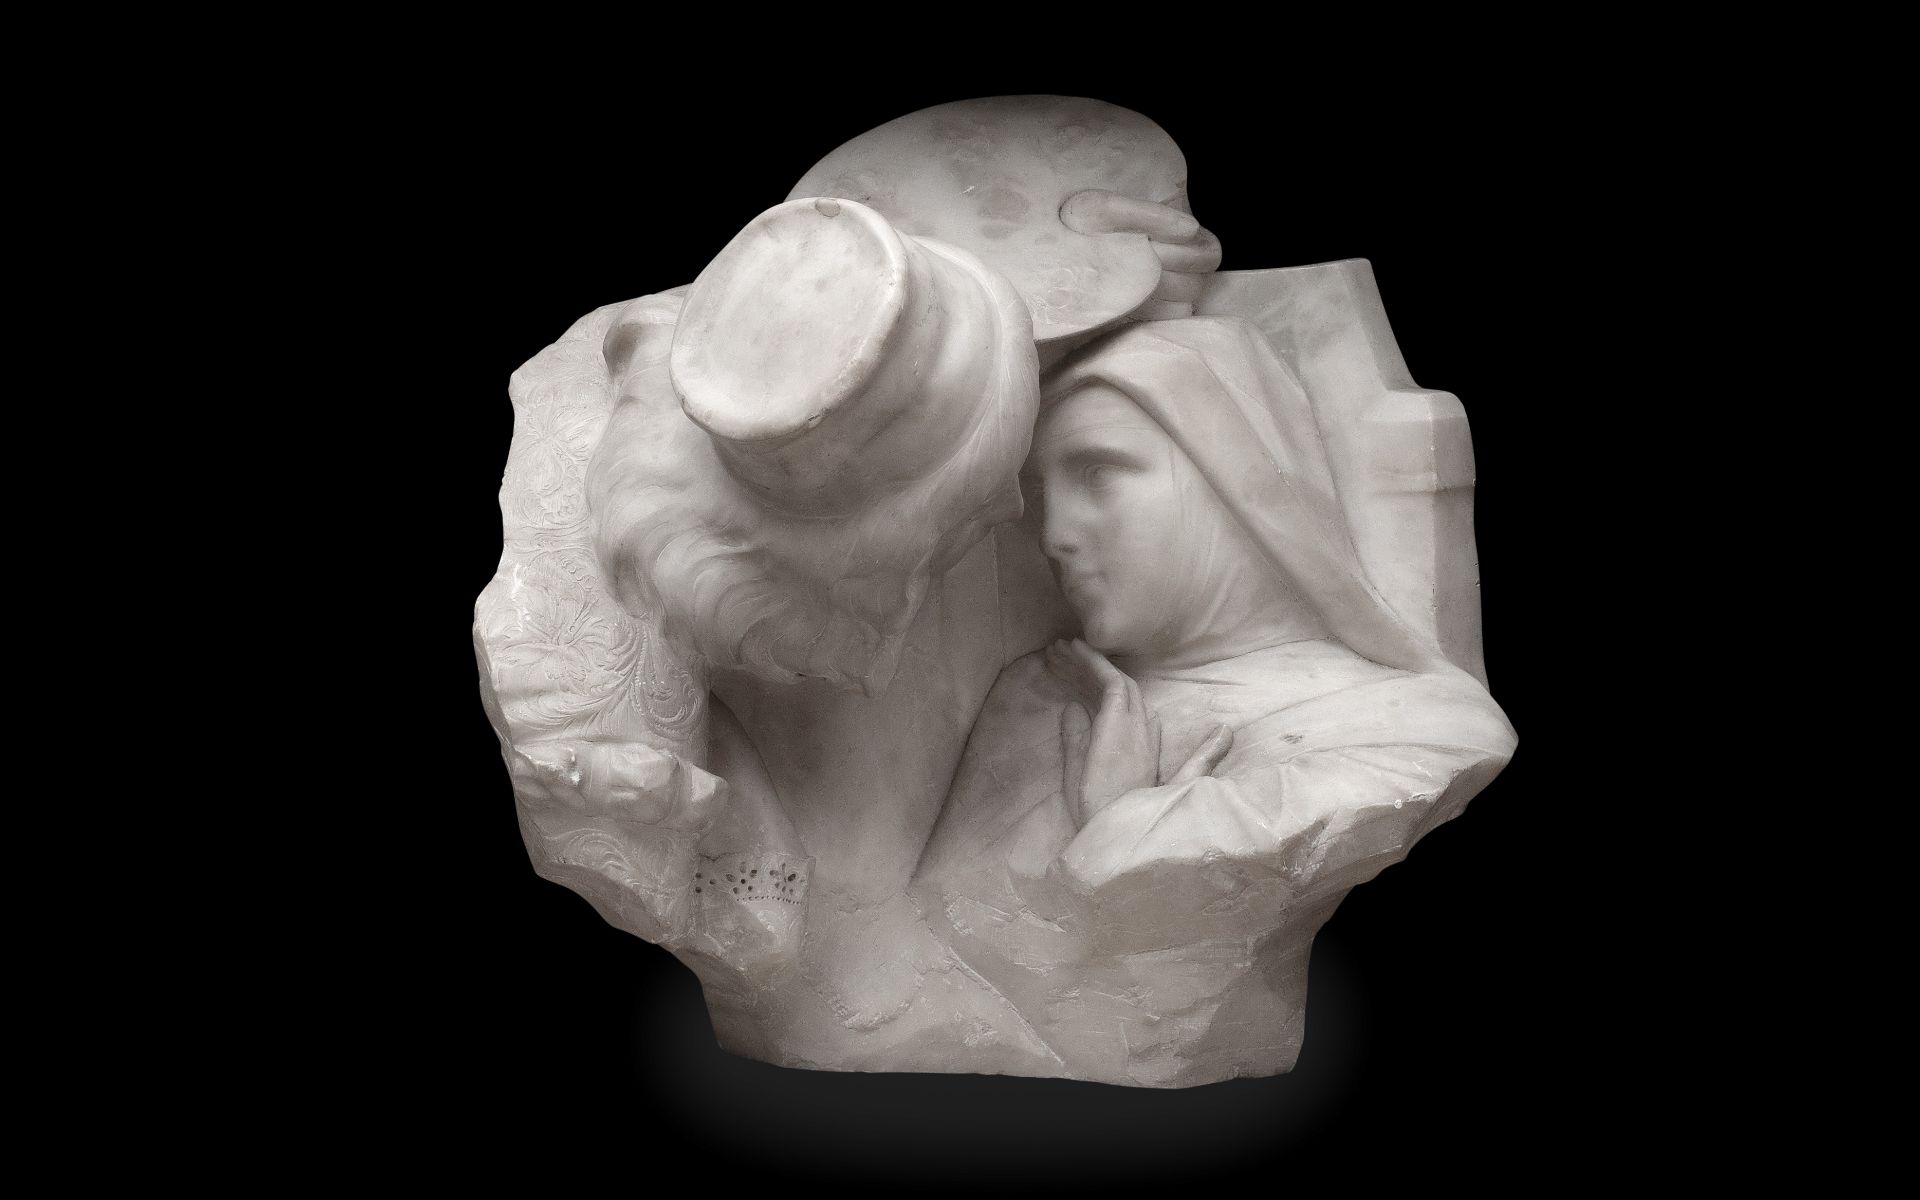 A LATE 19TH CENTURY ITALIAN ALABASTER SCULPTURE OF RAPHAEL AND HIS MUSE